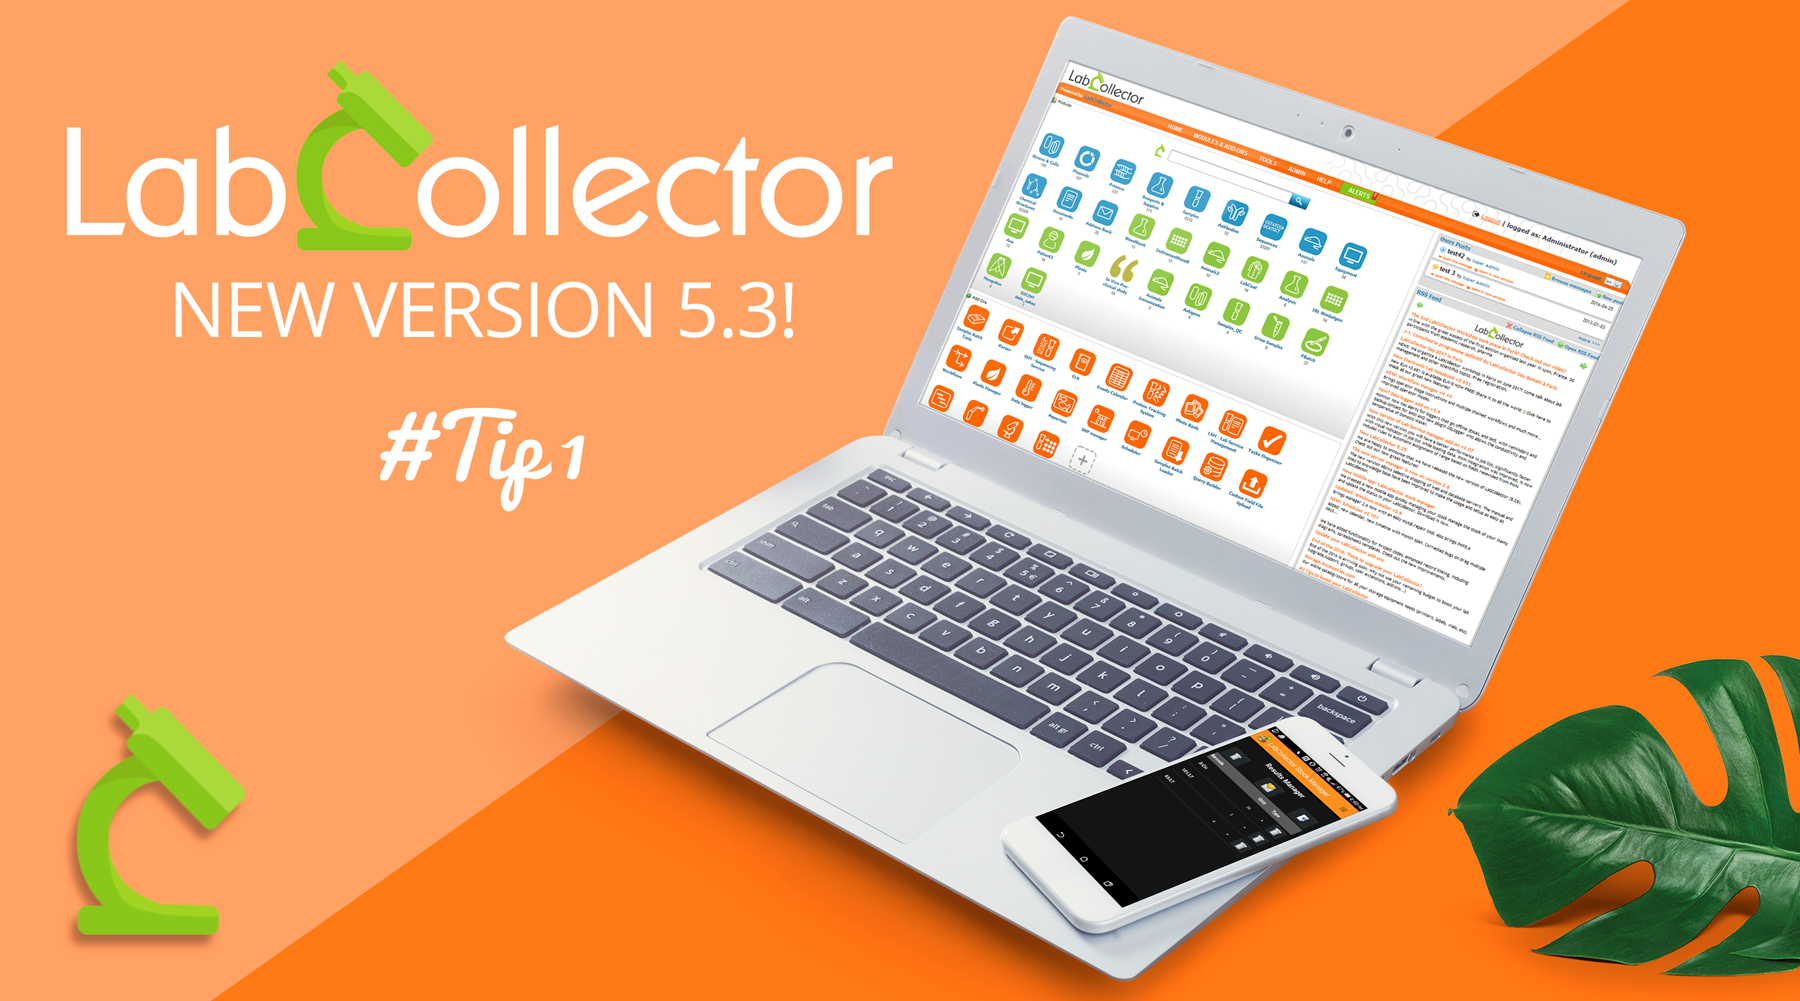 You are currently viewing LabCollector v5.3 Tip1